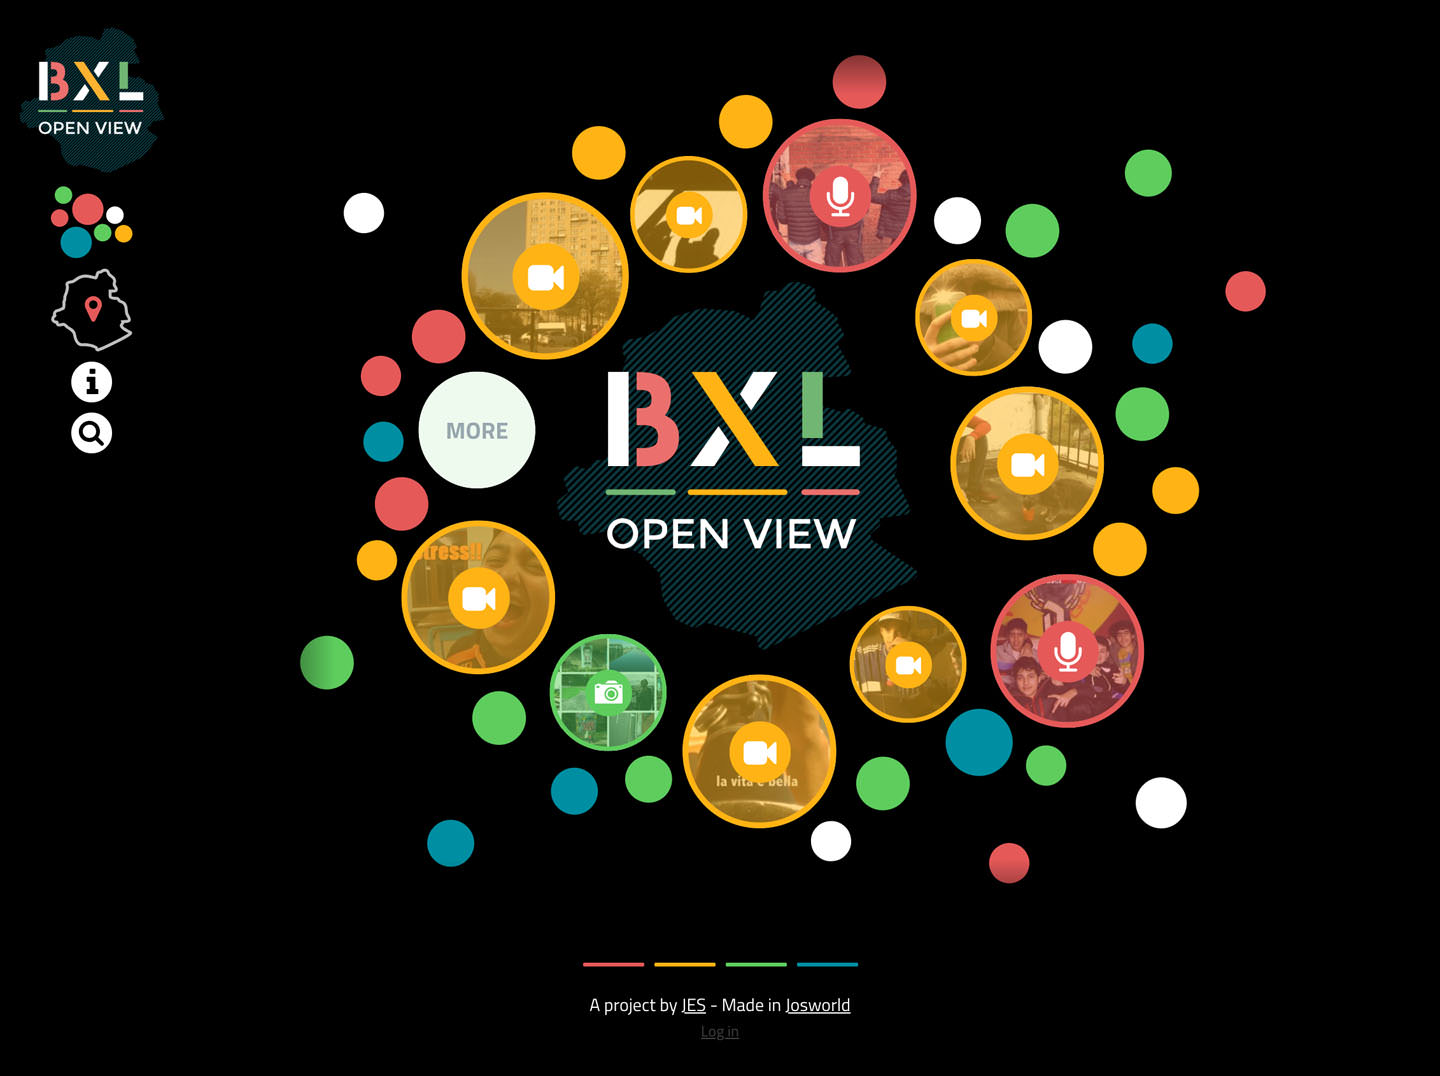 Homepage of BXL Open View.